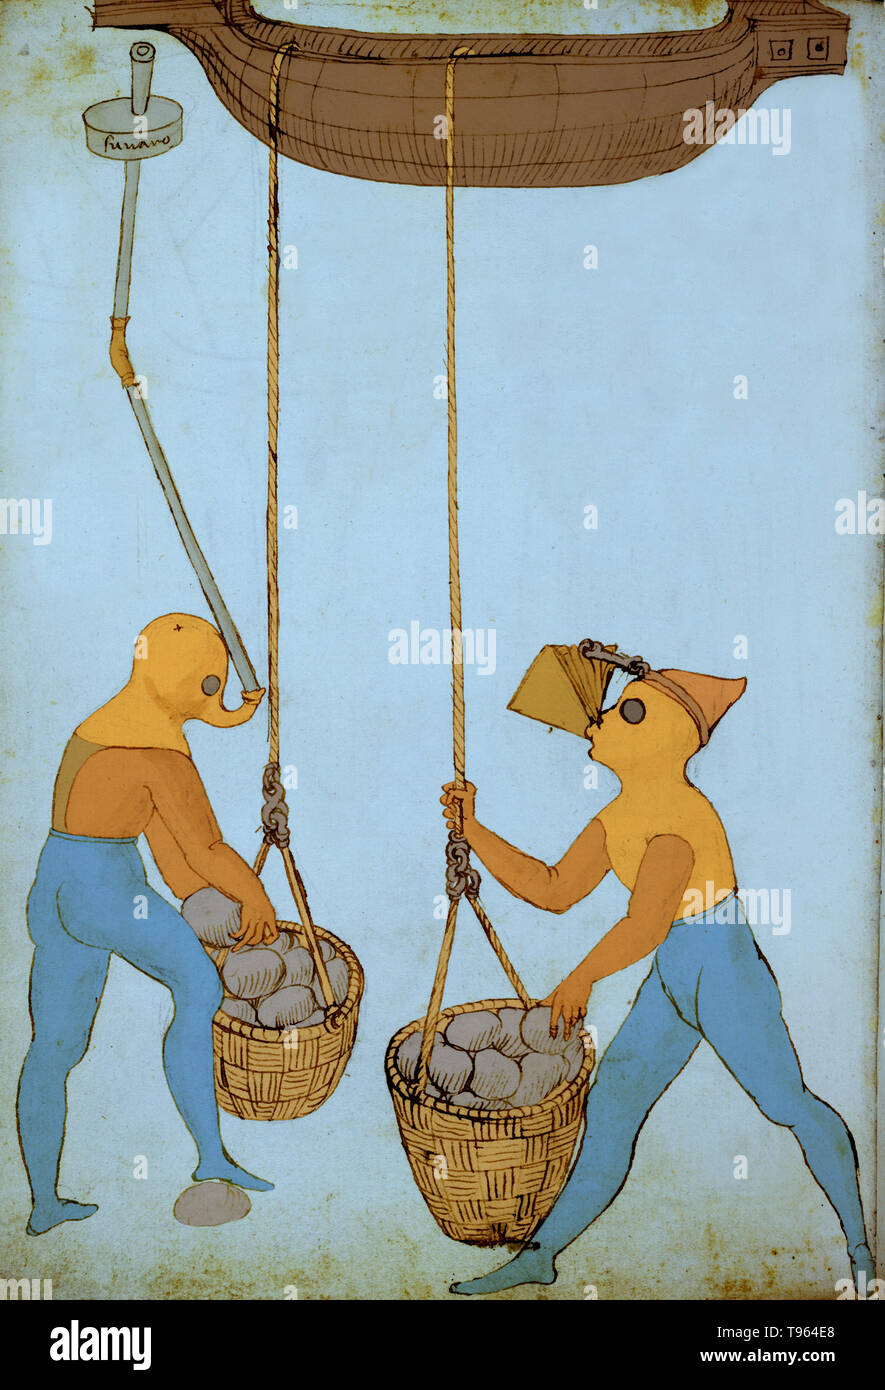 Color enhanced pen-and-ink drawing showing 15th-century Italian designs for underwater breathing apparatus for divers. From 'Della providentia della chuera,' by Francesco di Giorgio Martini of Siena (1439-1502). Between the Middle Ages and the Renaissance, Siena developed a series of technical specialities. Siena's artist-engineers put their skills into practice for their small republic and demonstrated their skill in depicting machines and mechanical systems. The two most prominent Sienese engineers were Mariano di Iacopo, known as Taccola, and Francesco di Giorgio. Stock Photo